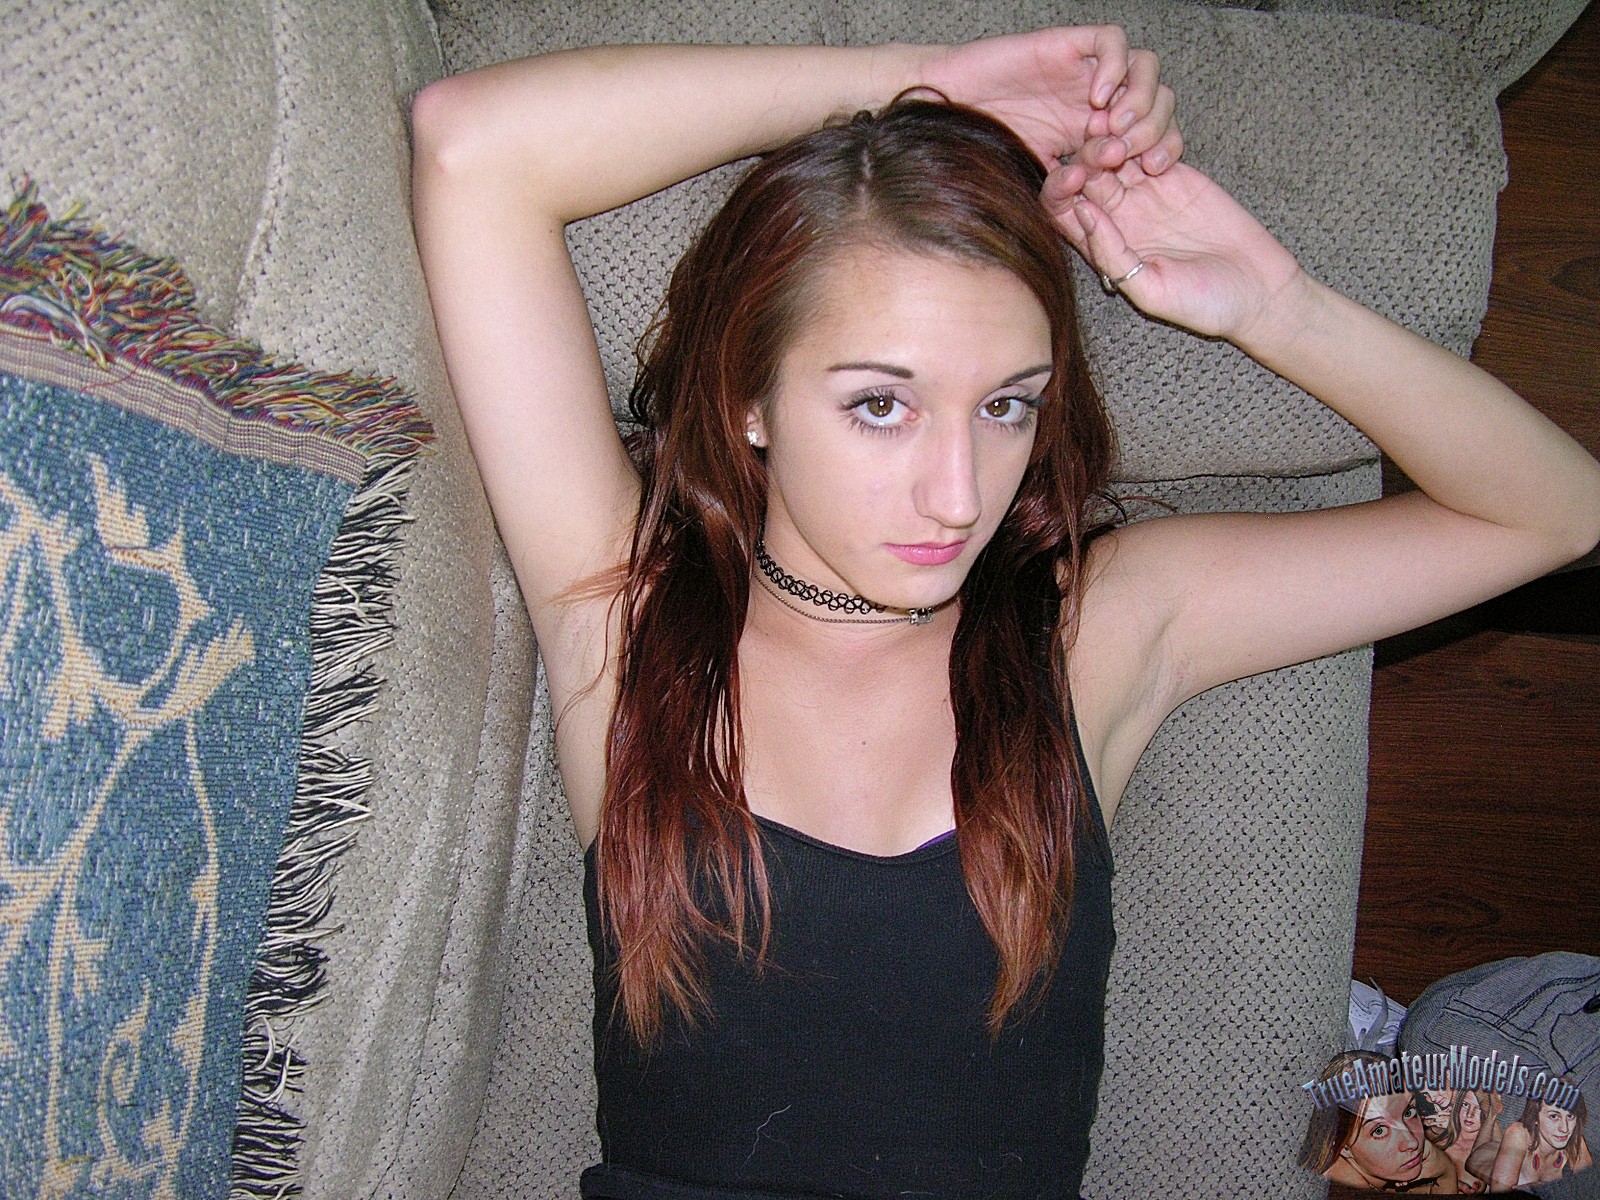 Cute Brunette Amateur Teen From Shopping Mall pic